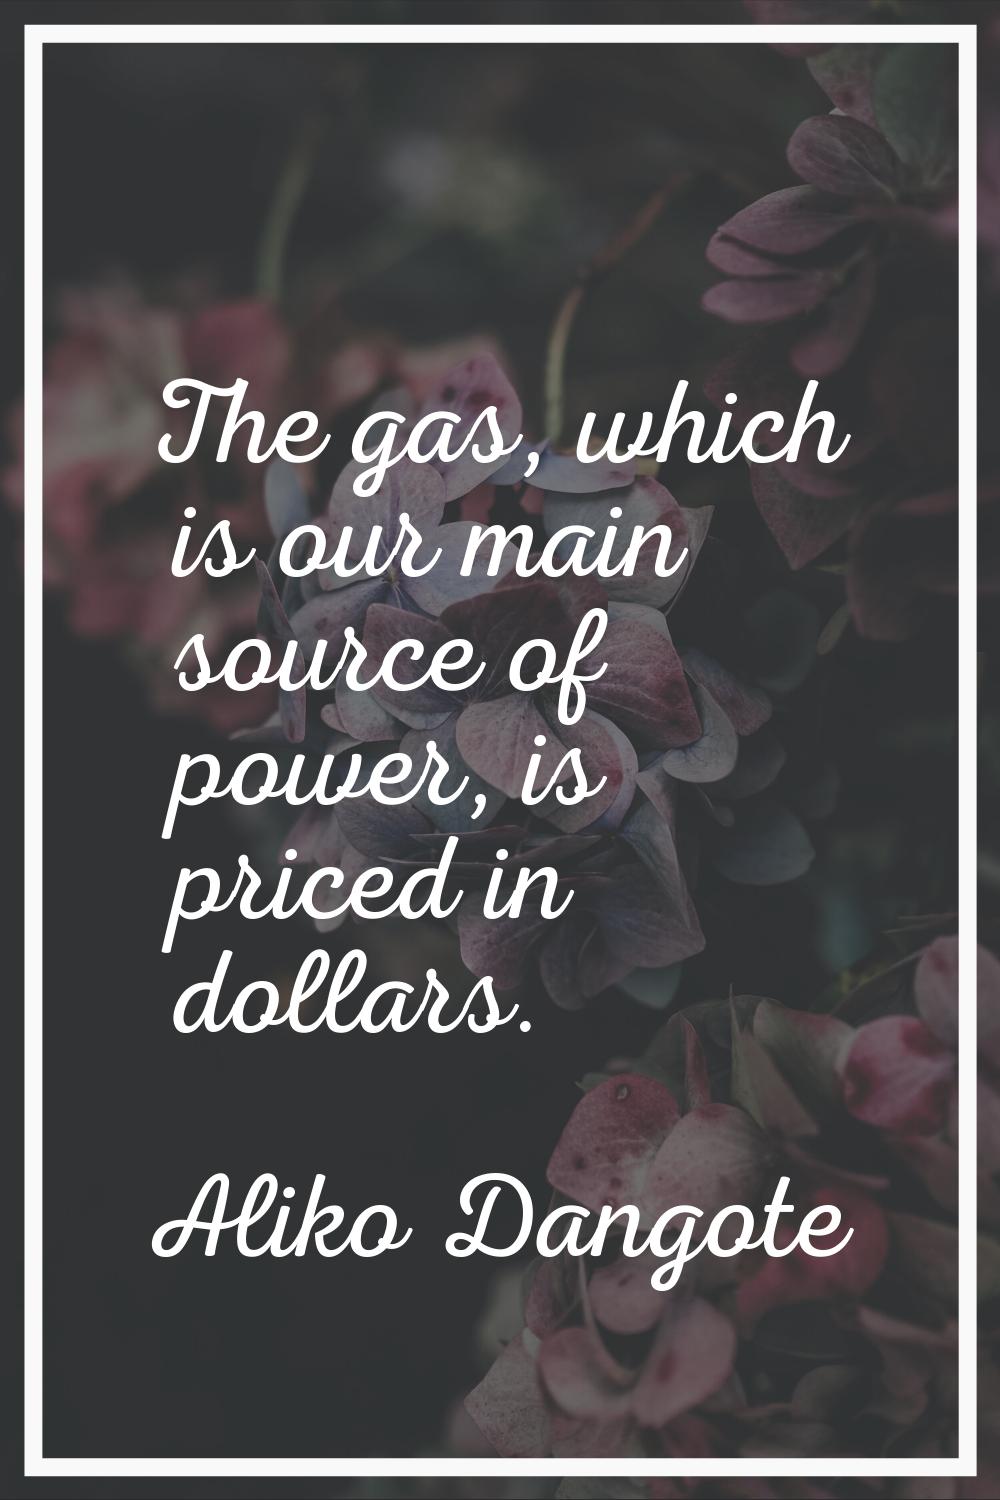 The gas, which is our main source of power, is priced in dollars.